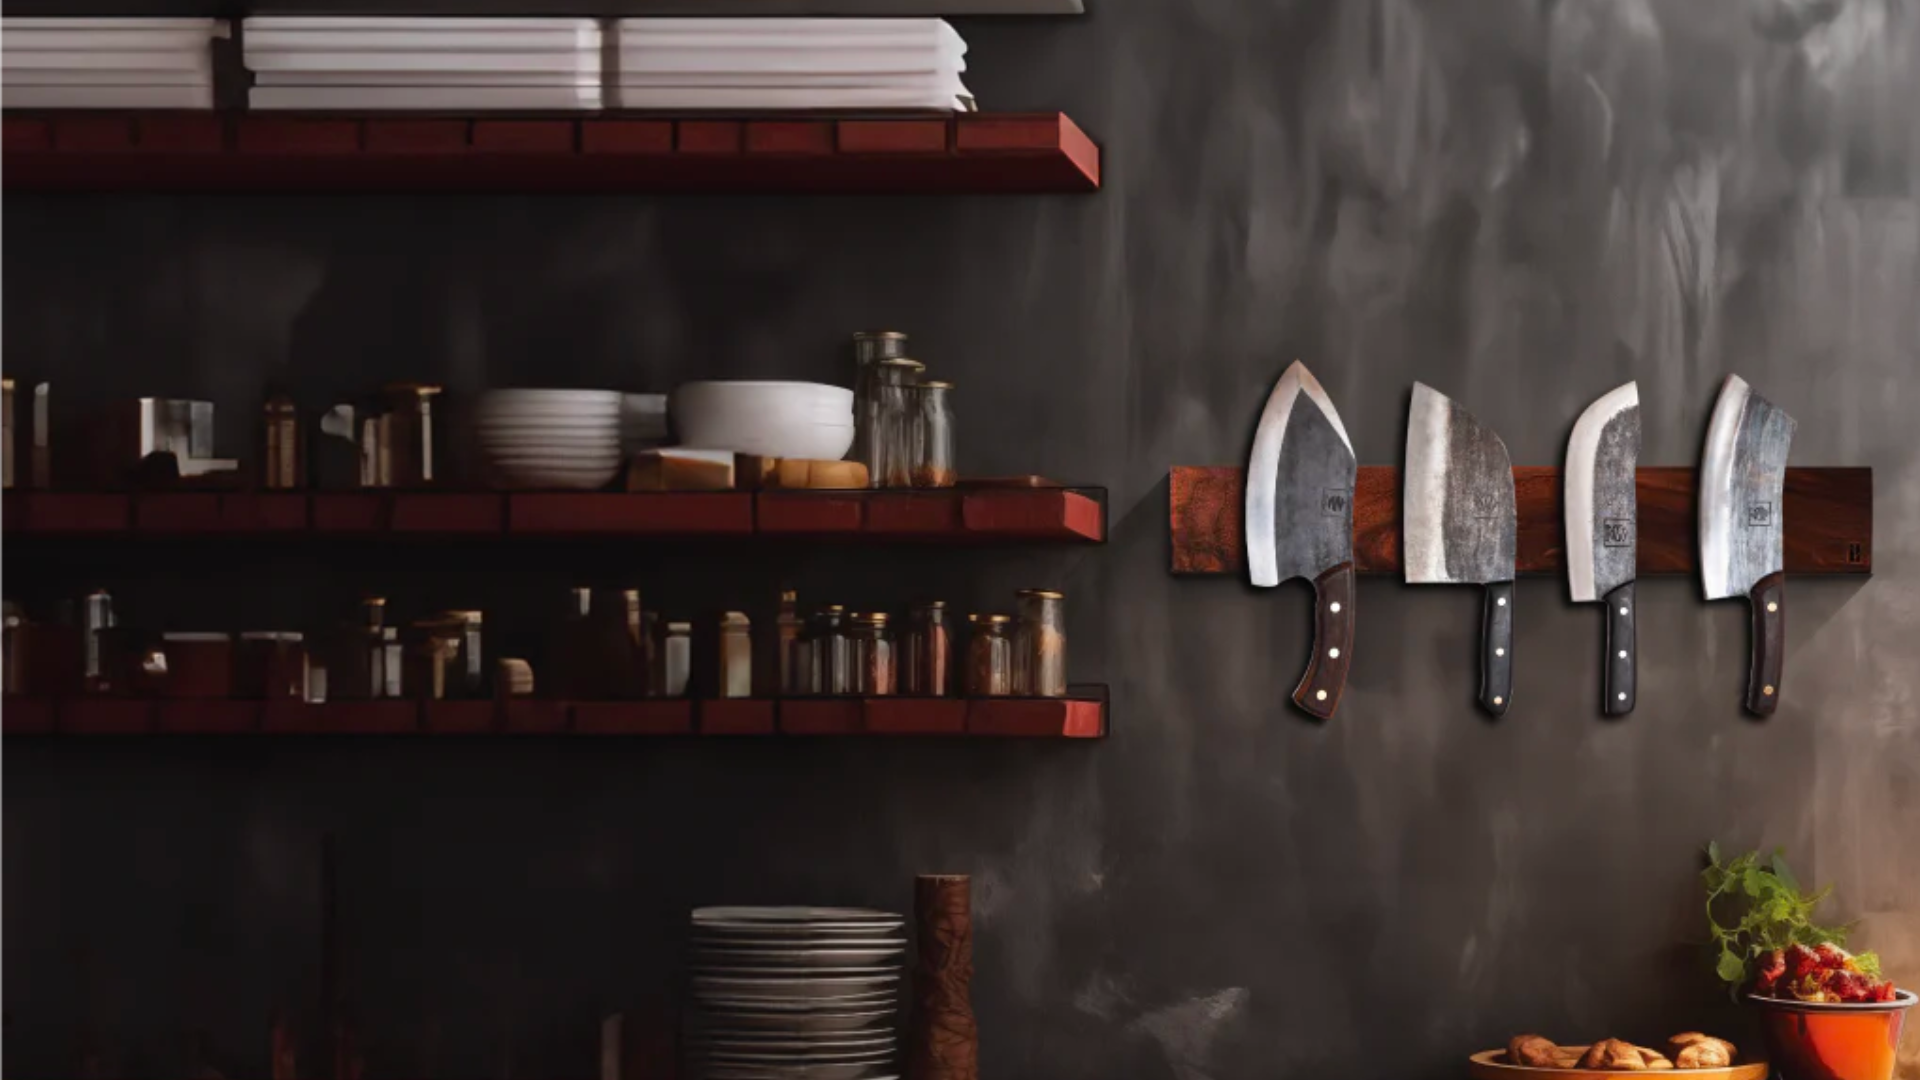 TOP 5 Ways to Incorporate Badass Knives into Your Kitchen Decor